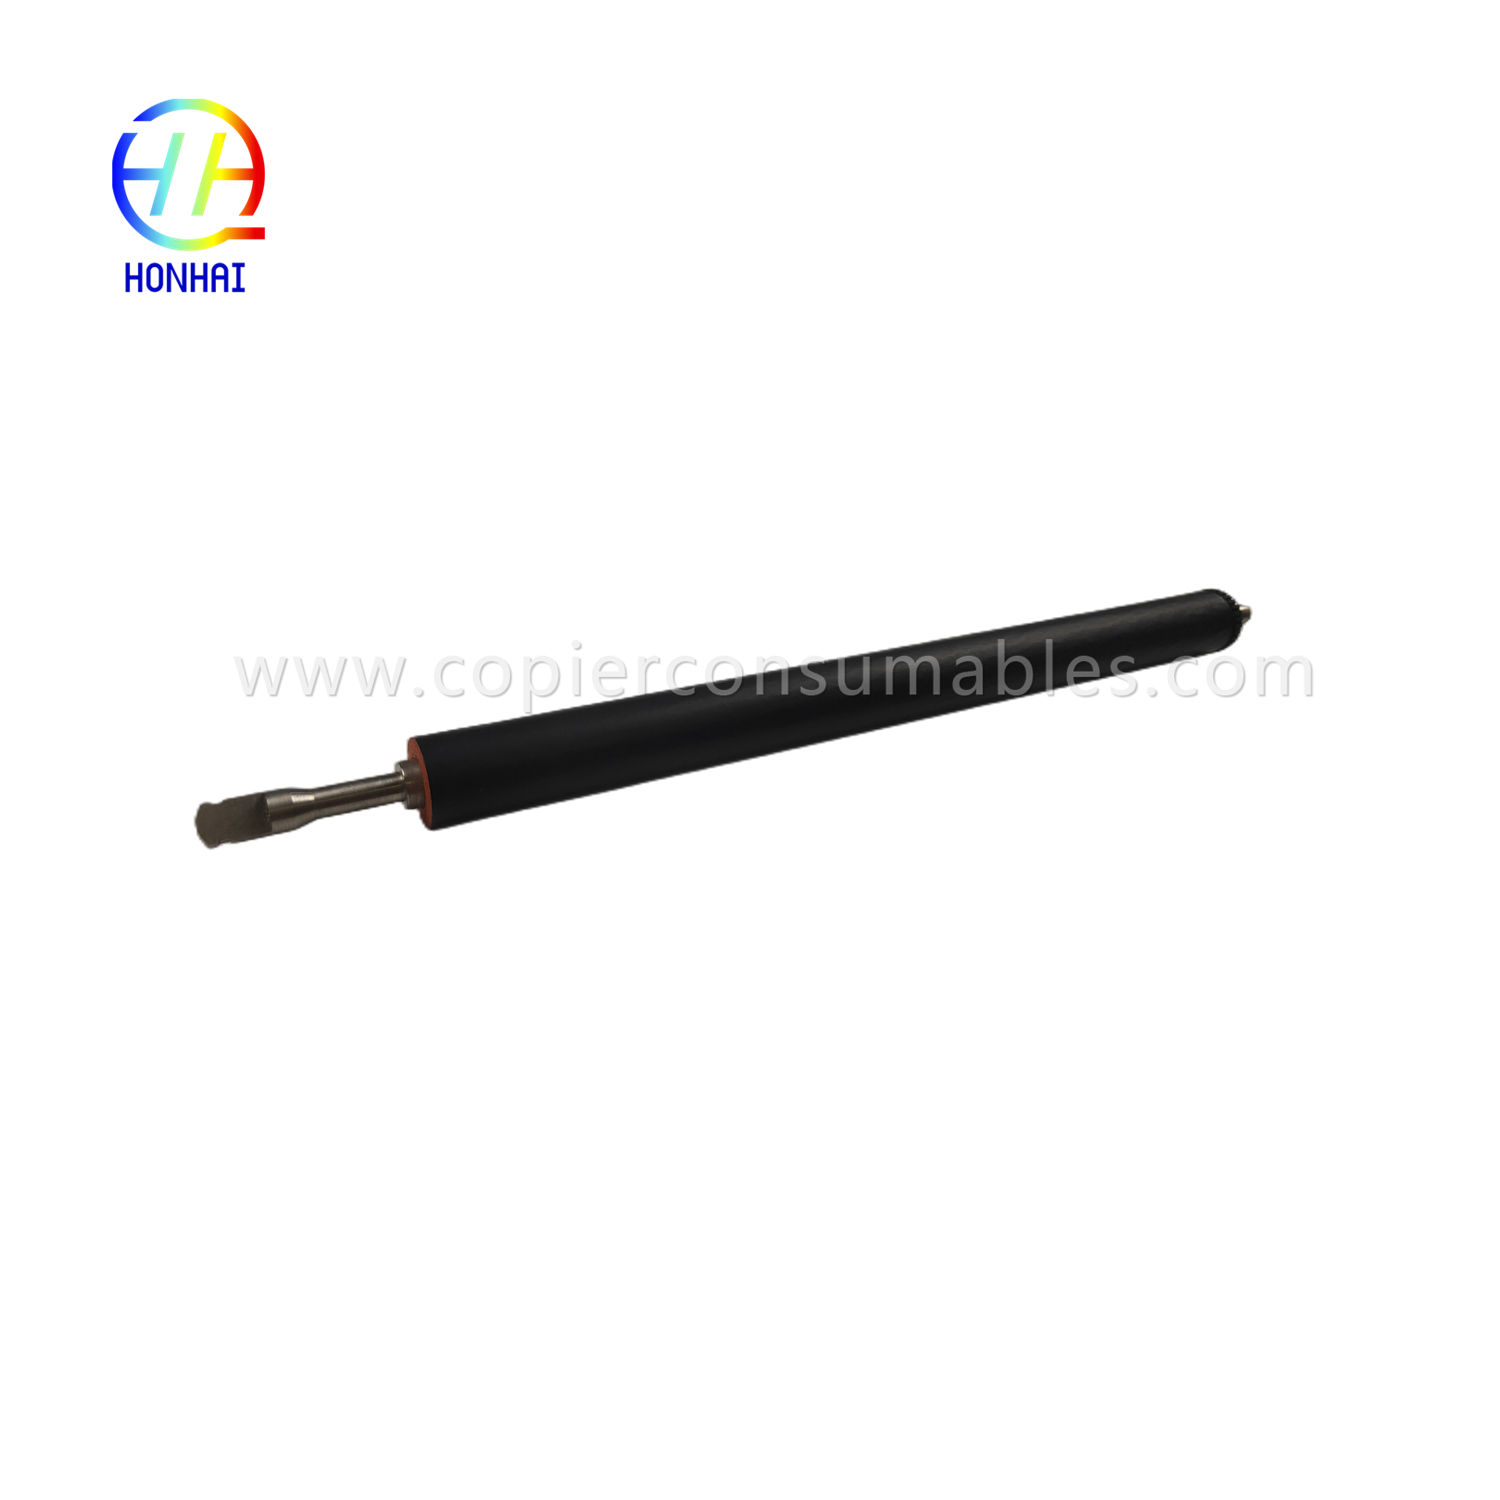 https://www.copierconsumables.com/lower-press-roller-for-hp-laserjet-p1102-m1536dnf-p1606dn-lower-fuser-pression-roller-product/